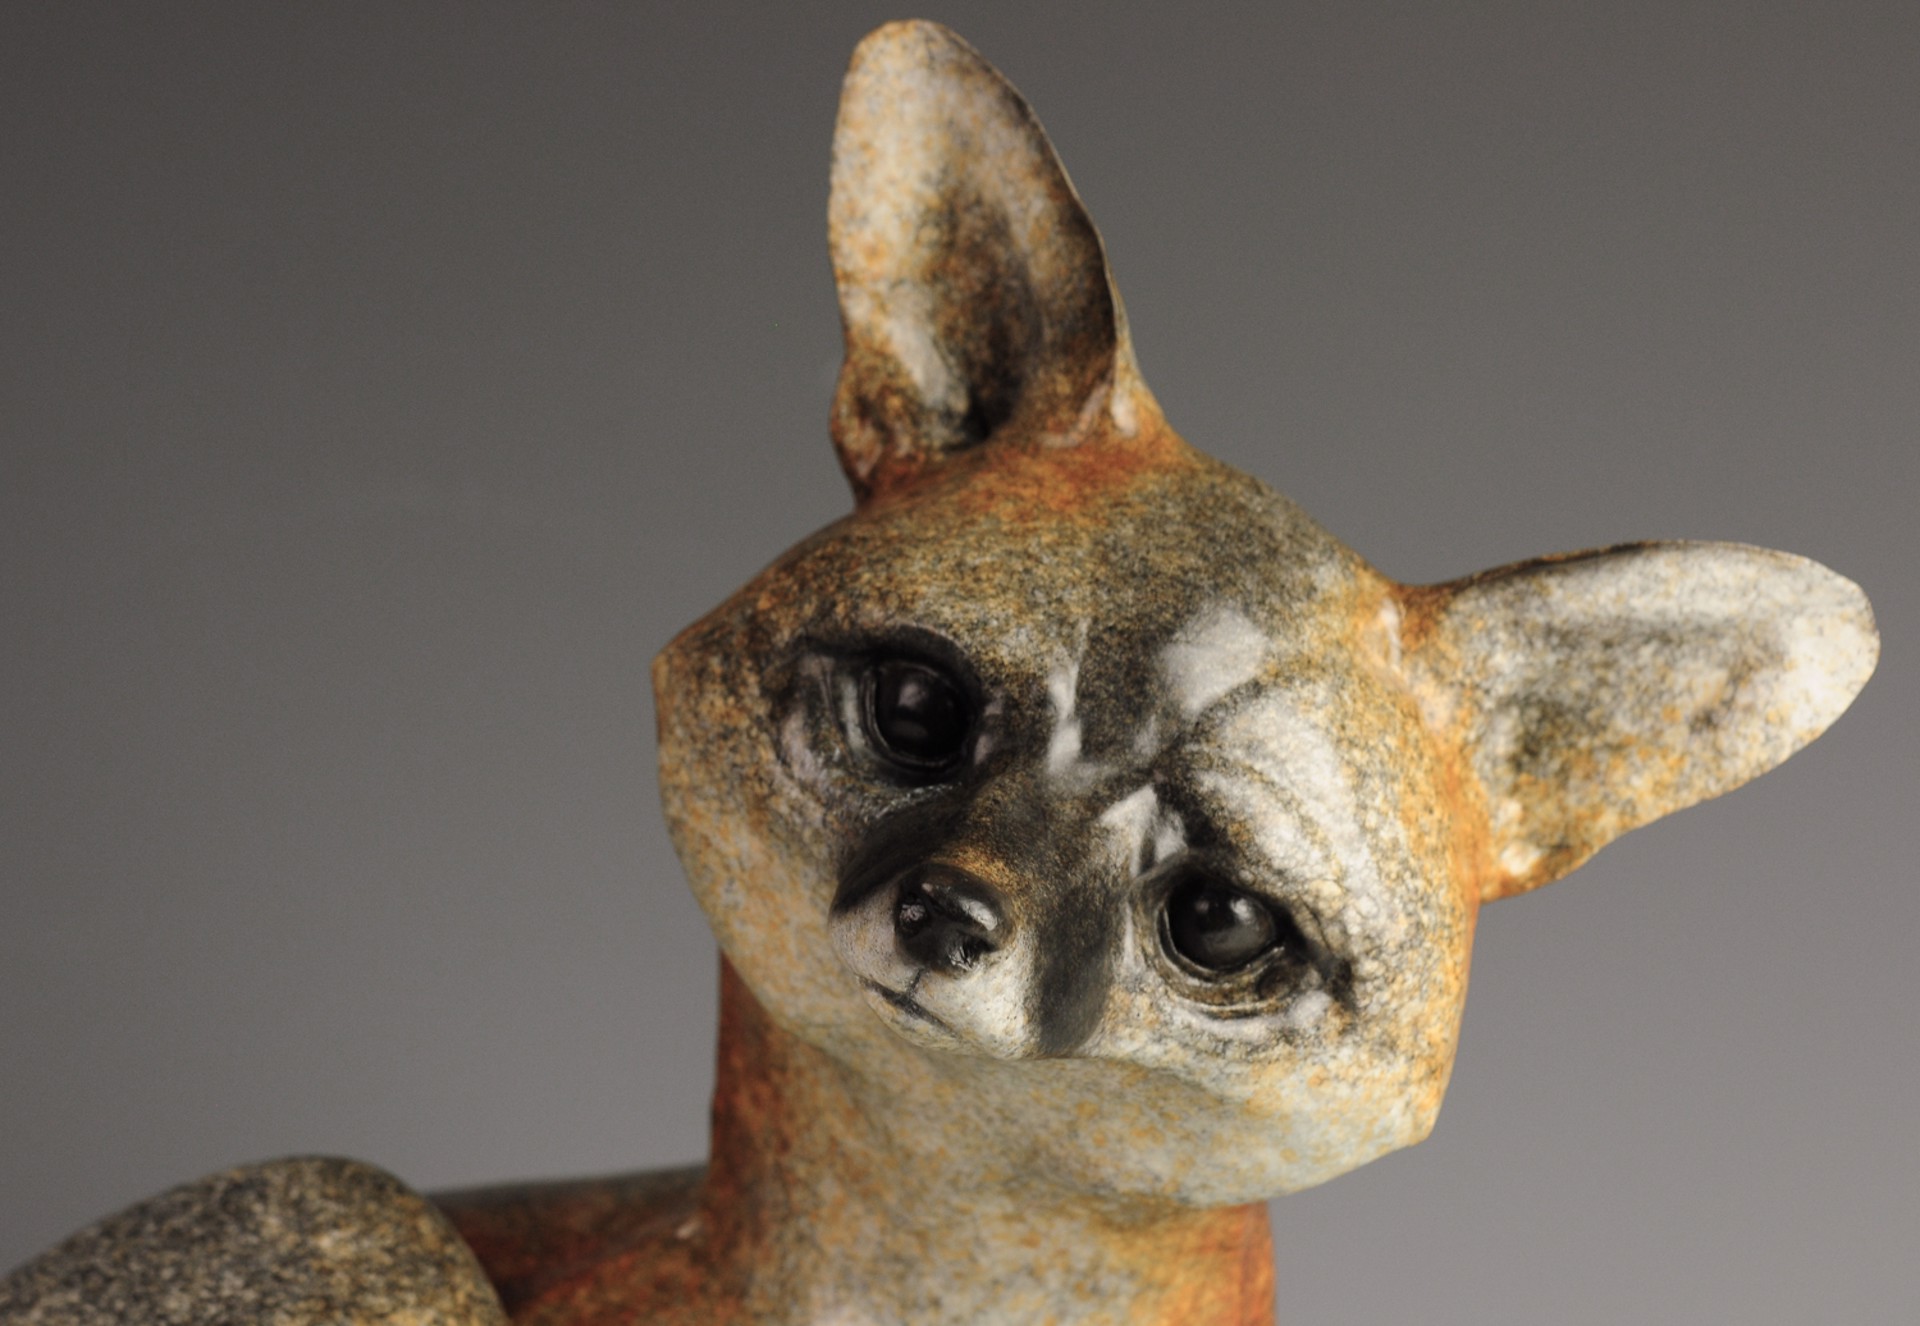 A Fine Art Sculpture In Bronze By Jeremy Bradshaw Featuring A Small Fox With Tilted Head, Available At Gallery Wild